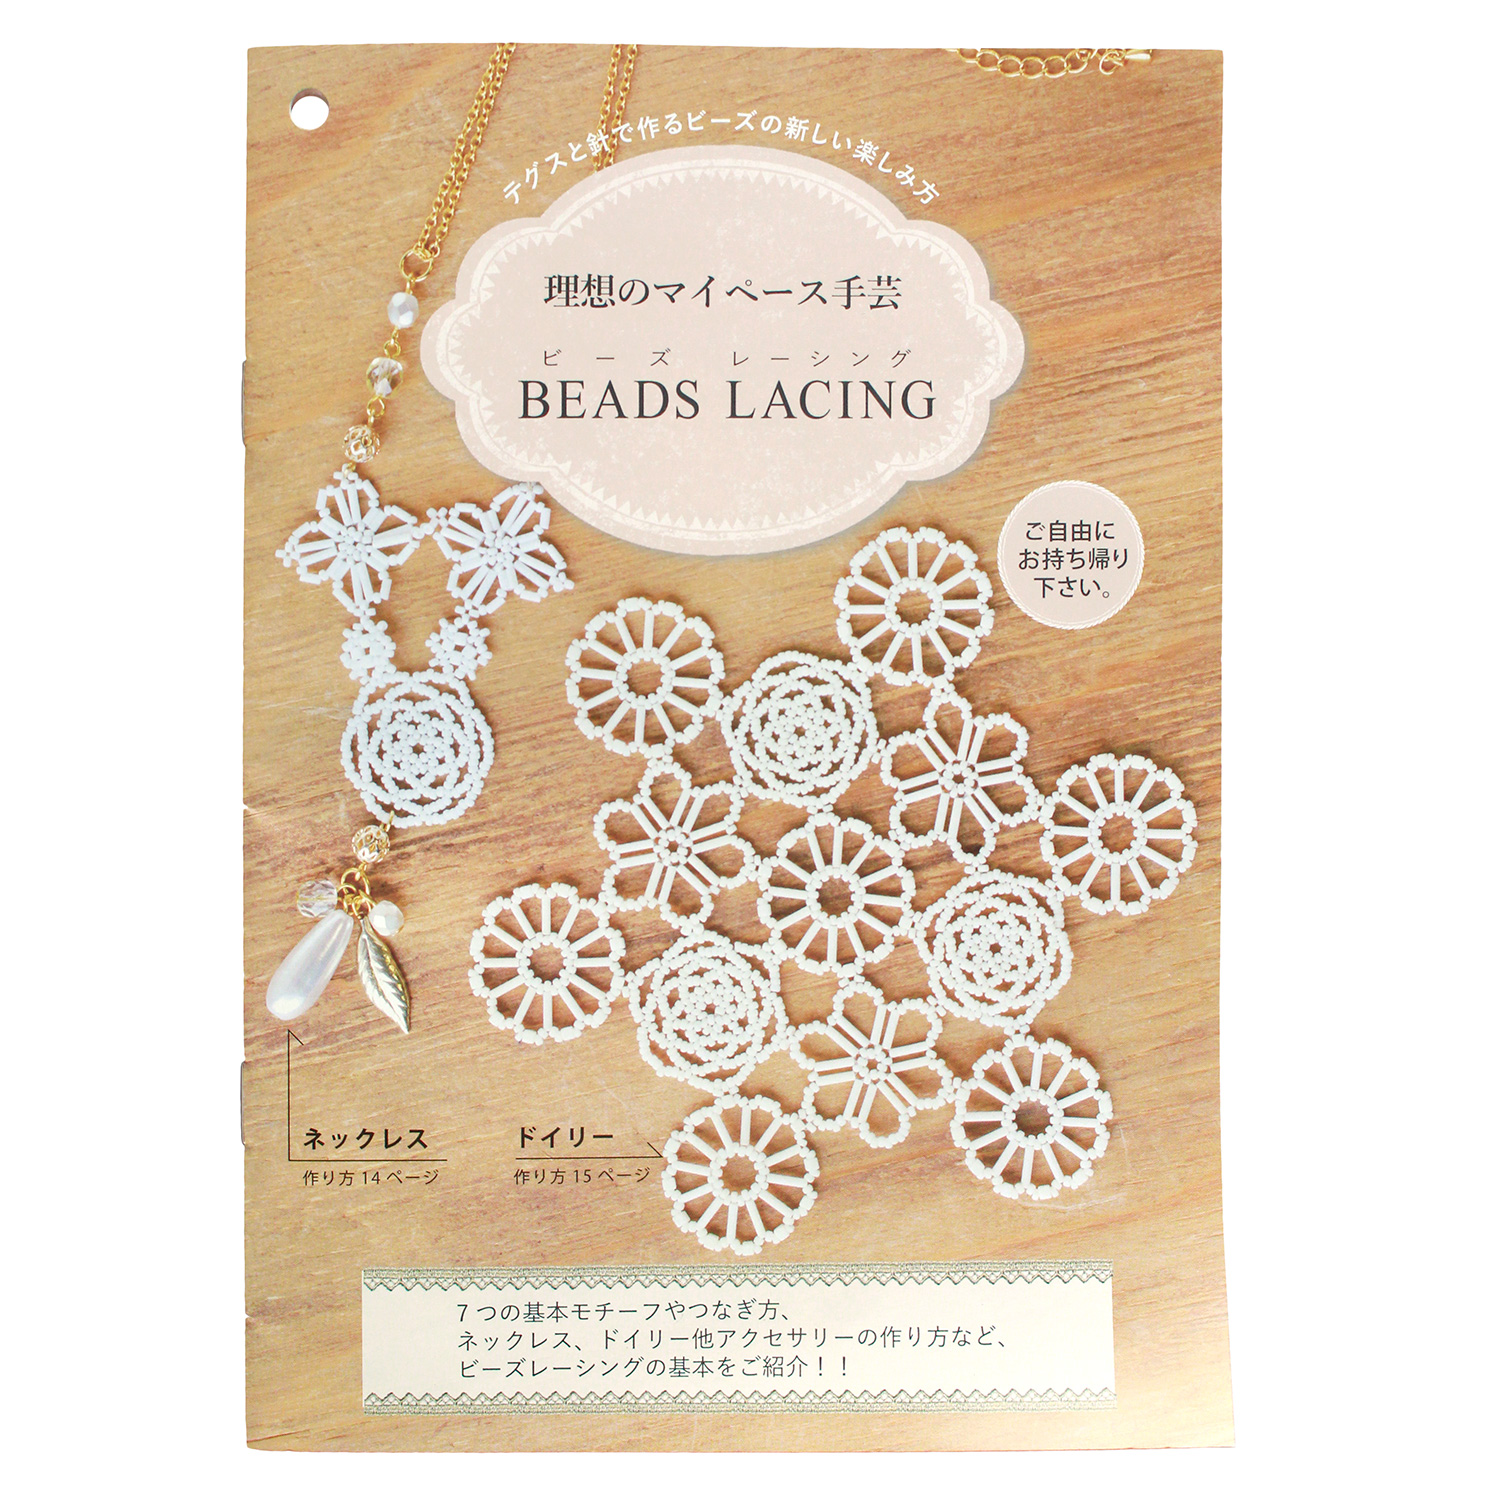 FR0016 Beads Lacing How to Make Book (Book)